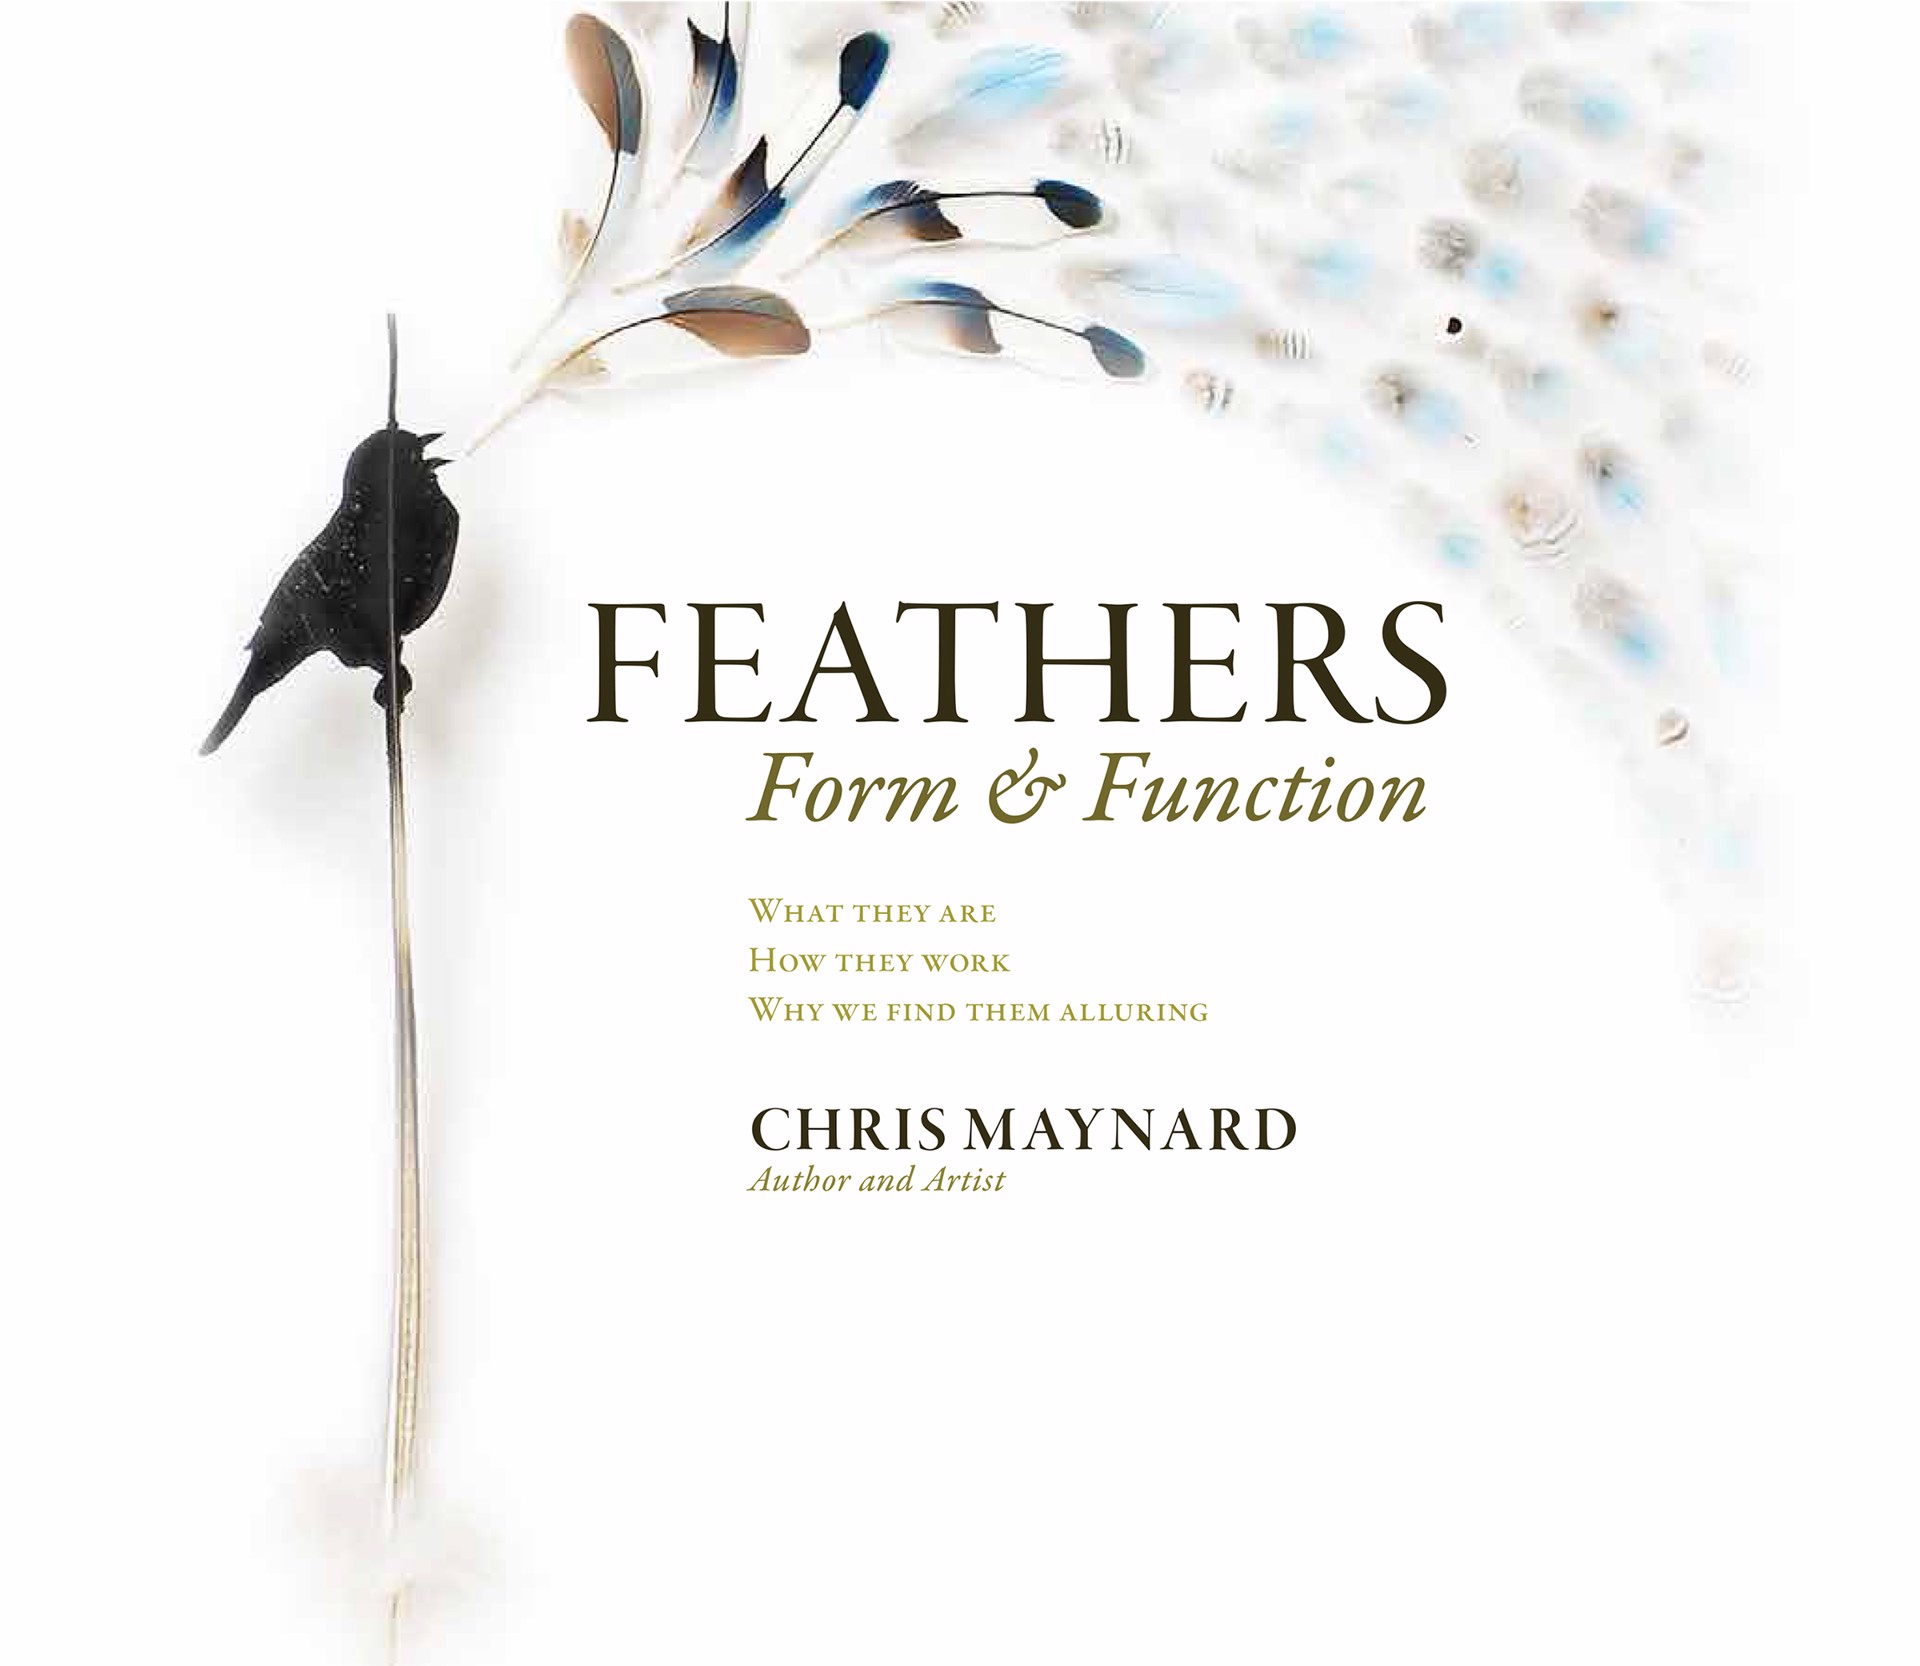 Feathers- Form & Function by Chris Maynard